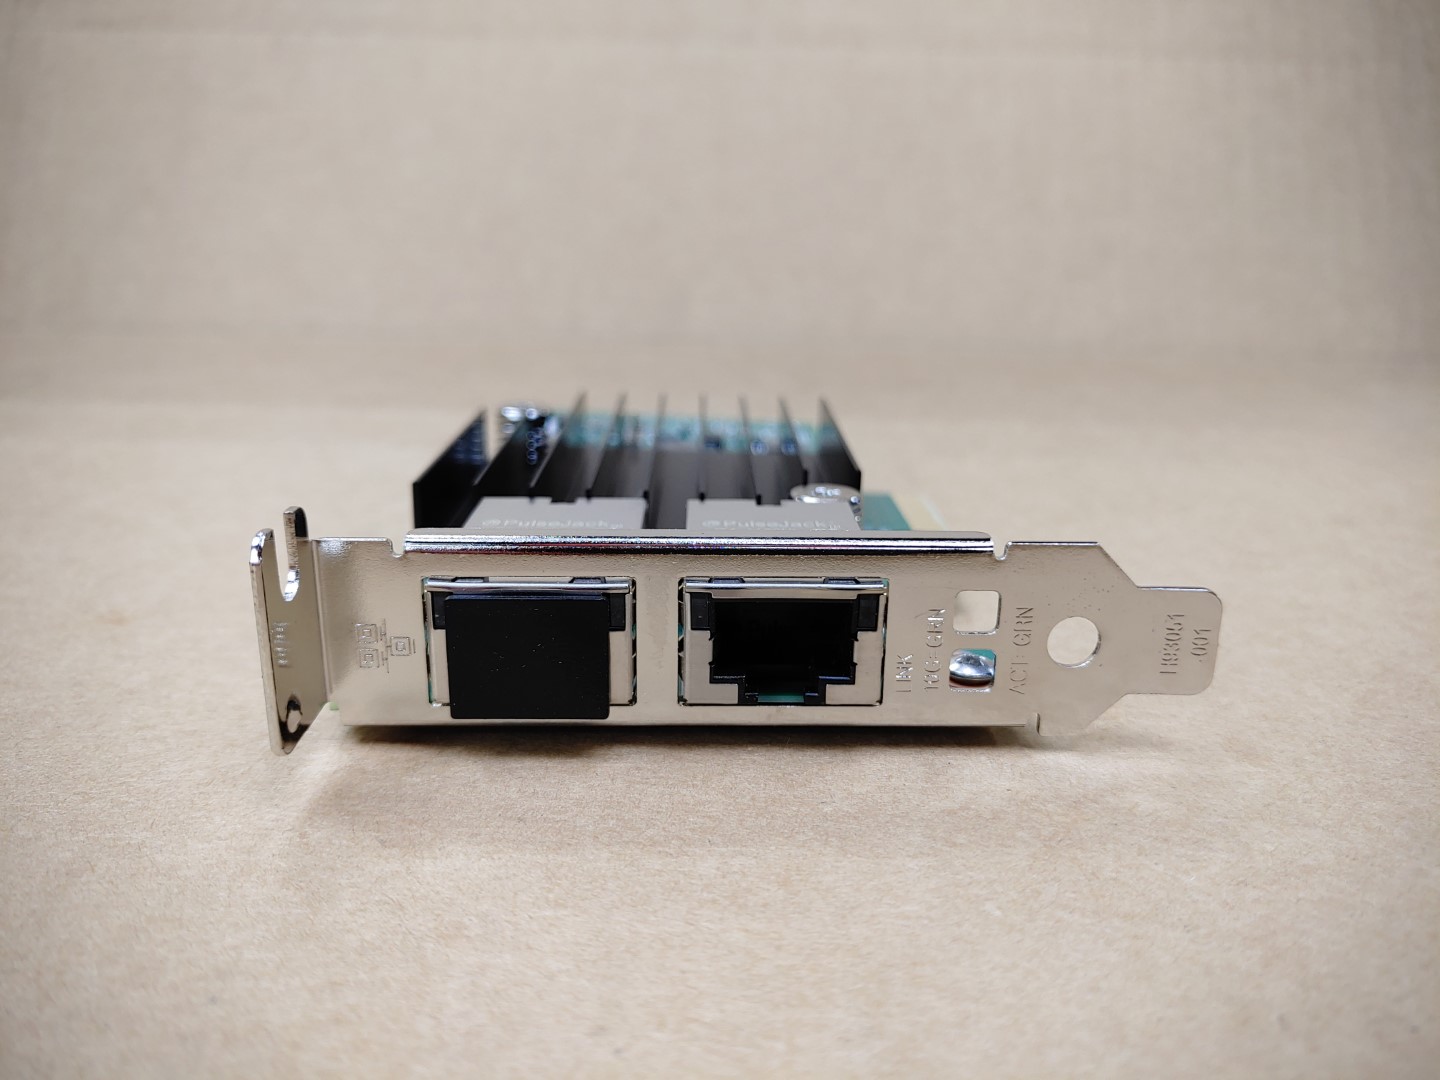 Excellent condition! Tested and pulled from a working environment! Item Specifics: MPN : X550T2G1P5UPC : N/AType : Network CardBrand : IntelModel : X550-T2 (X550T2G1P5)Compatible Port/Slot : PCIeNetwork Ports : RJ-45Maximum Data Rate : 10 GbpsNumer of Ports : 2 - 2